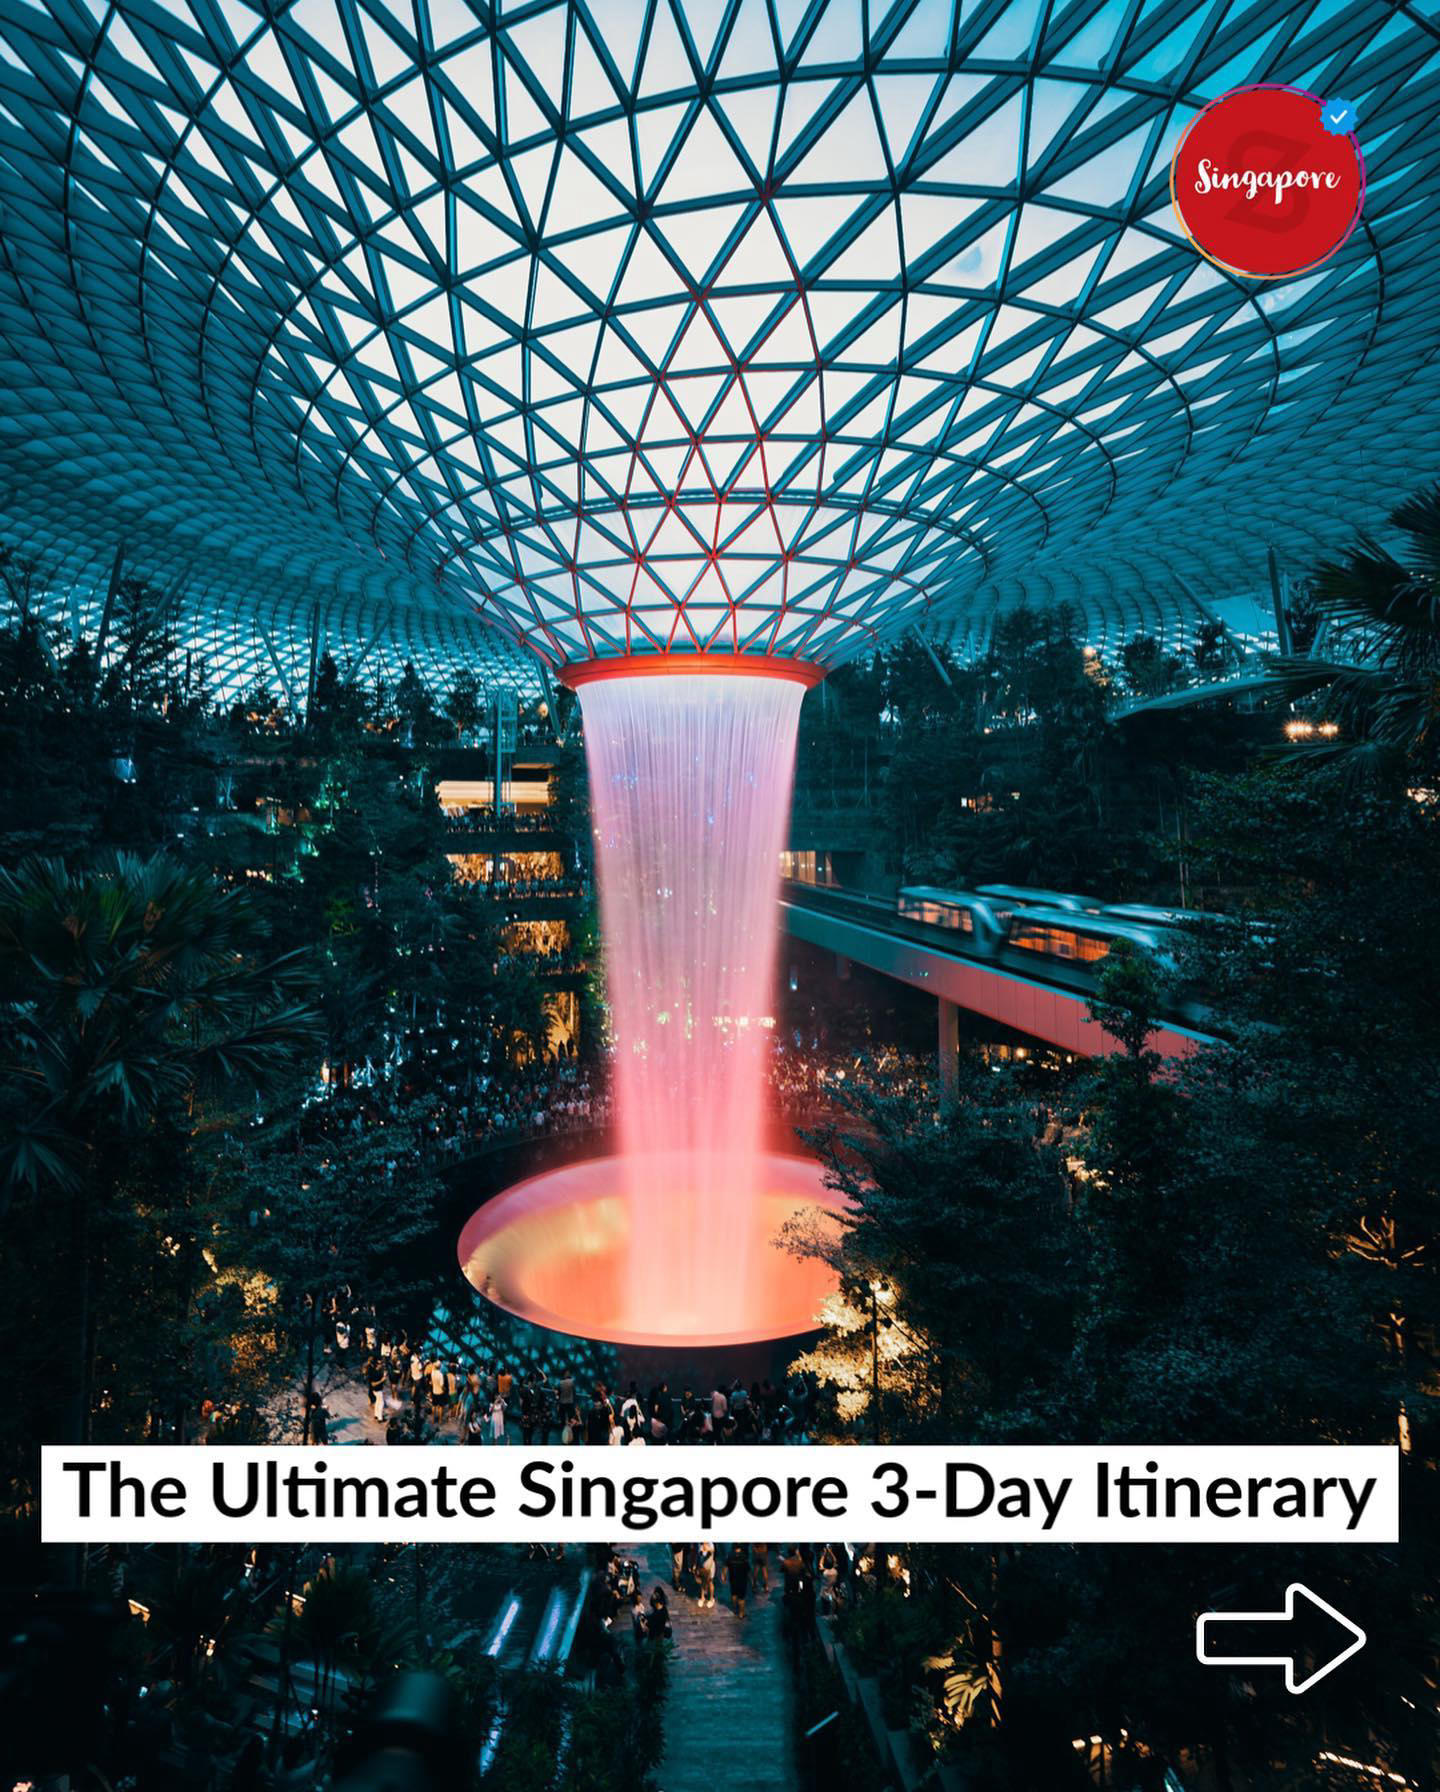 Singapore 🇸🇬 Travel | Hotels | Food | Tips - Discover Singapore in 3 days and upgrade your experie